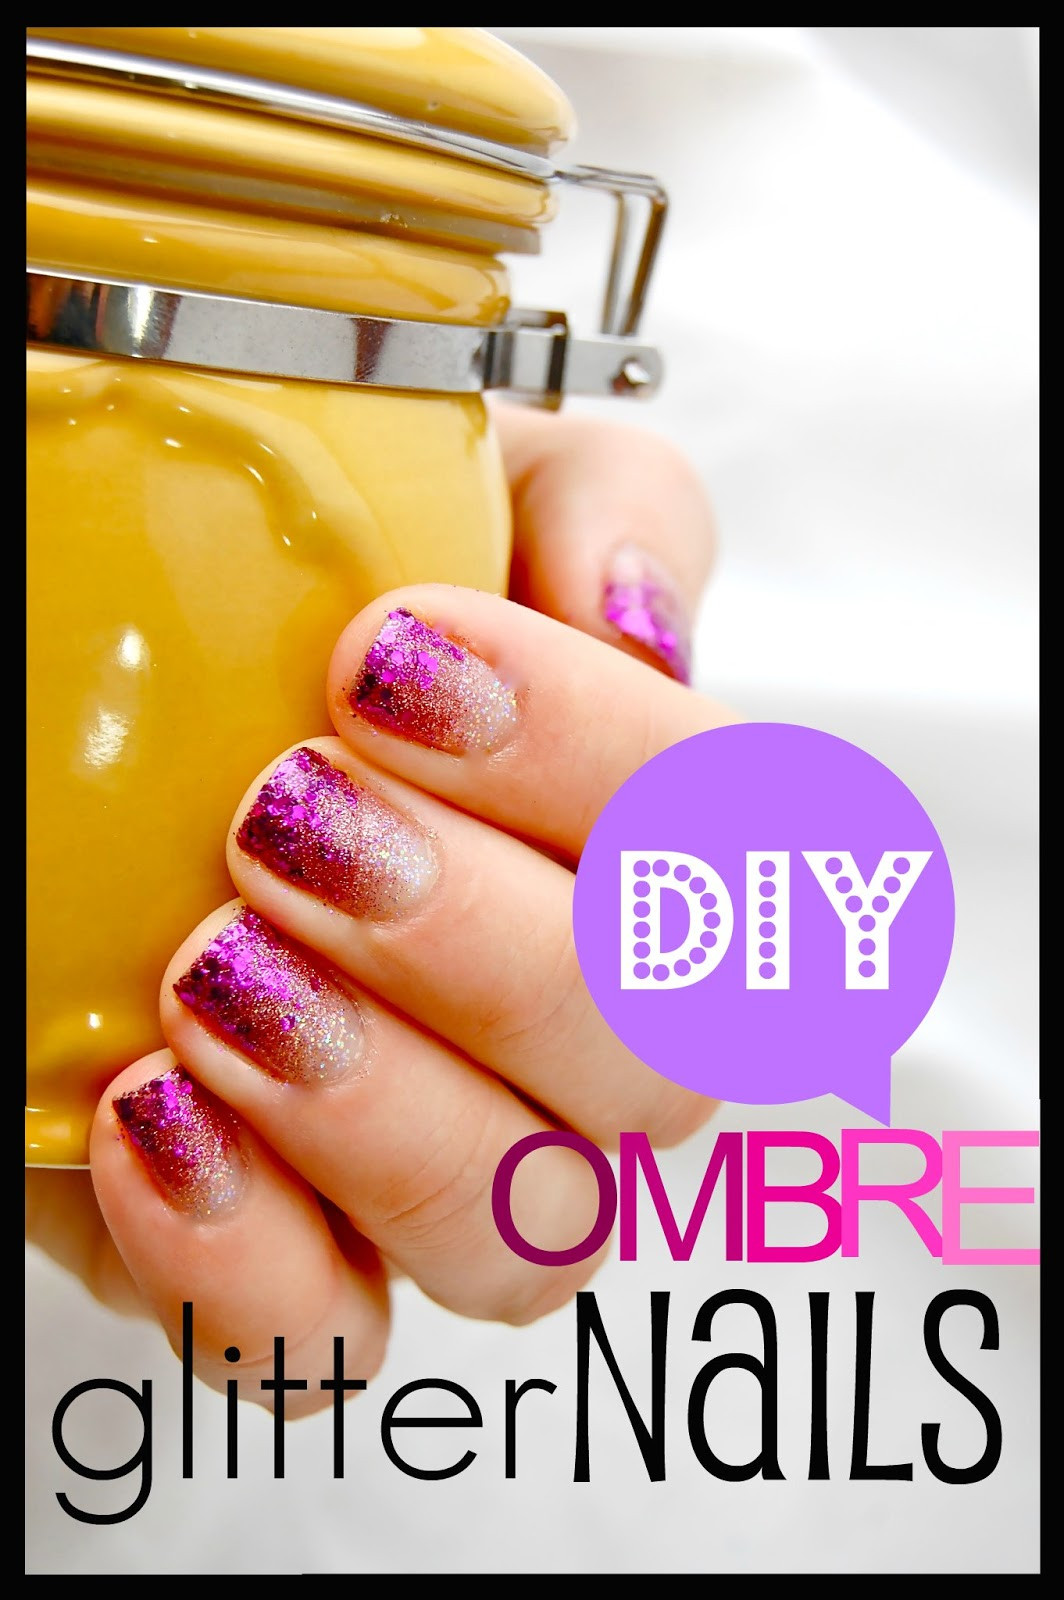 Diy Glitter Nails
 That s So Cuegly DIY Ombre Glitter Nails